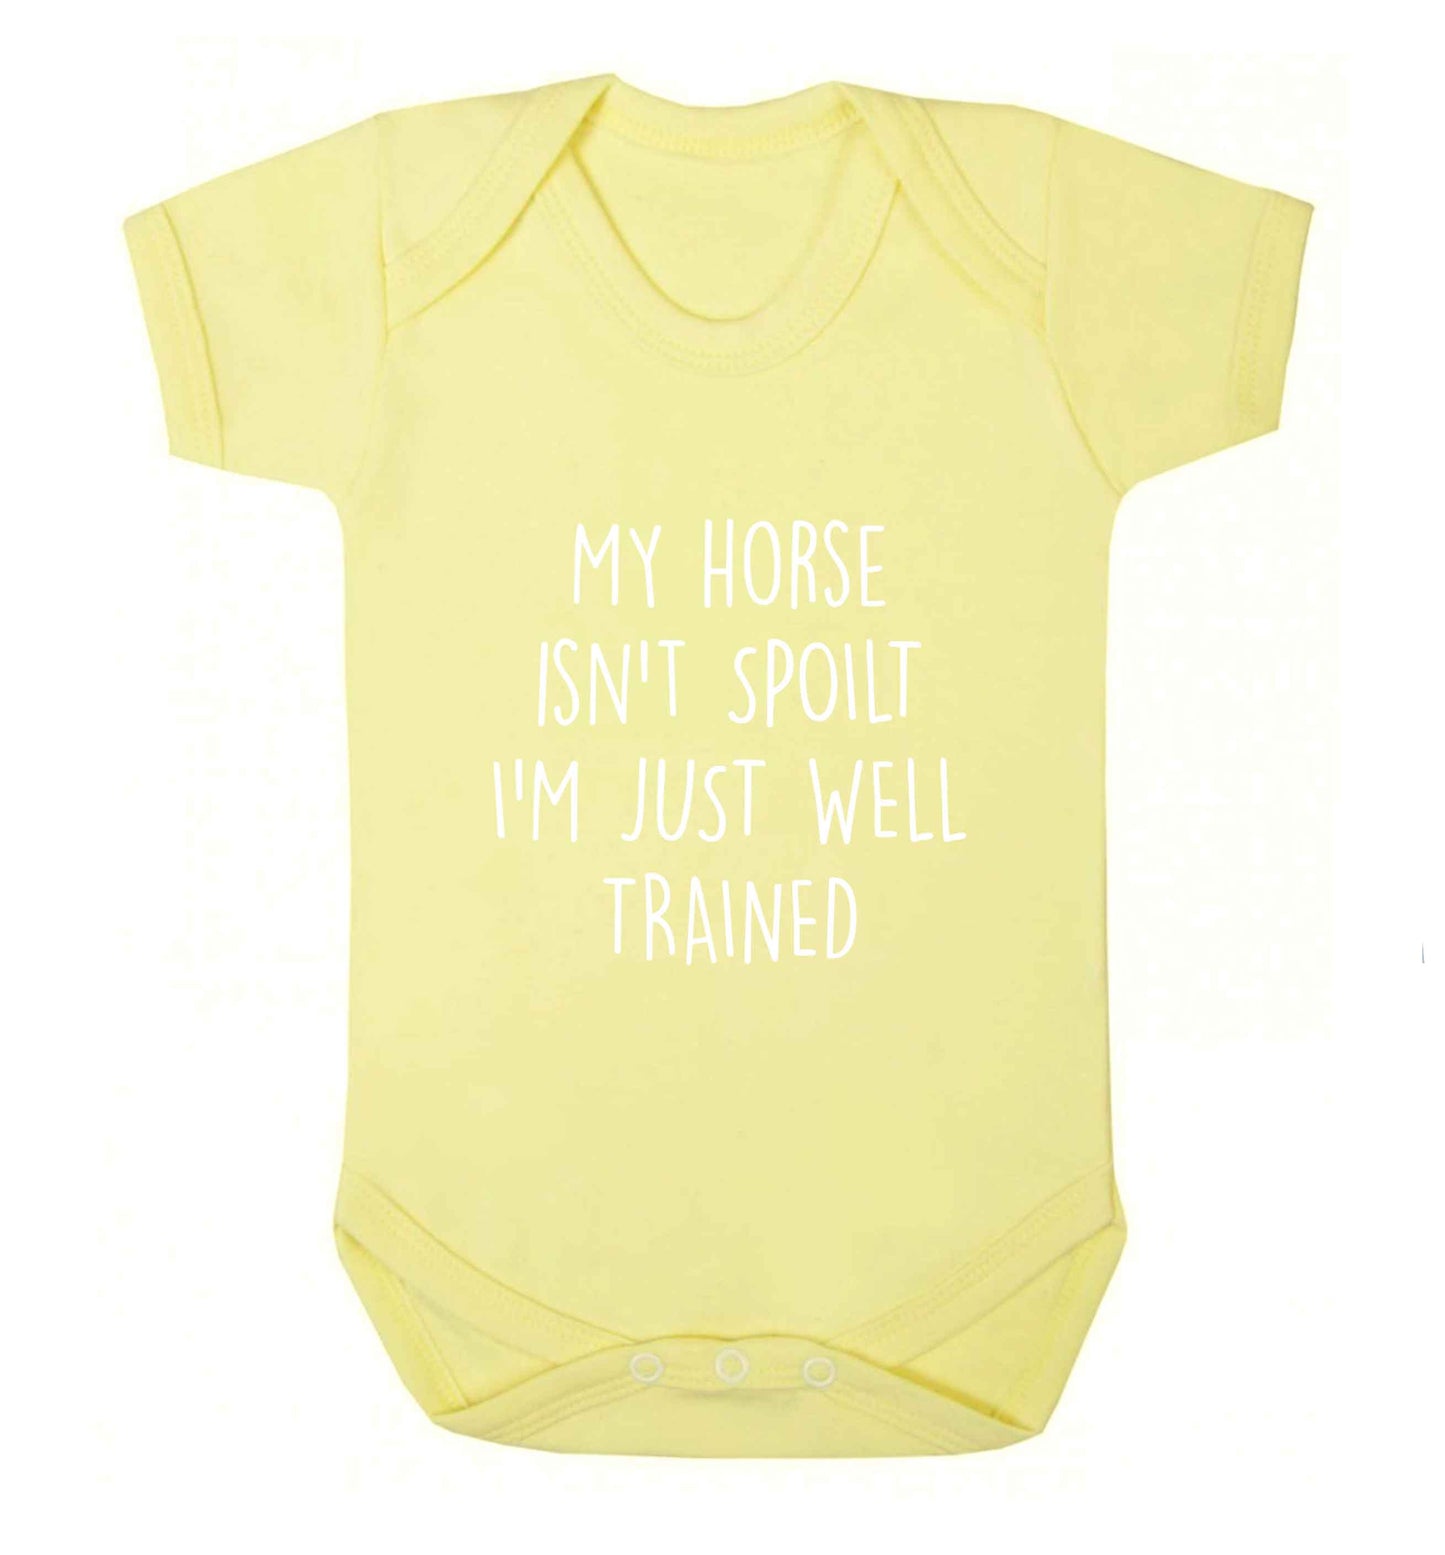 My horse isn't spoilt I'm just well trained baby vest pale yellow 18-24 months